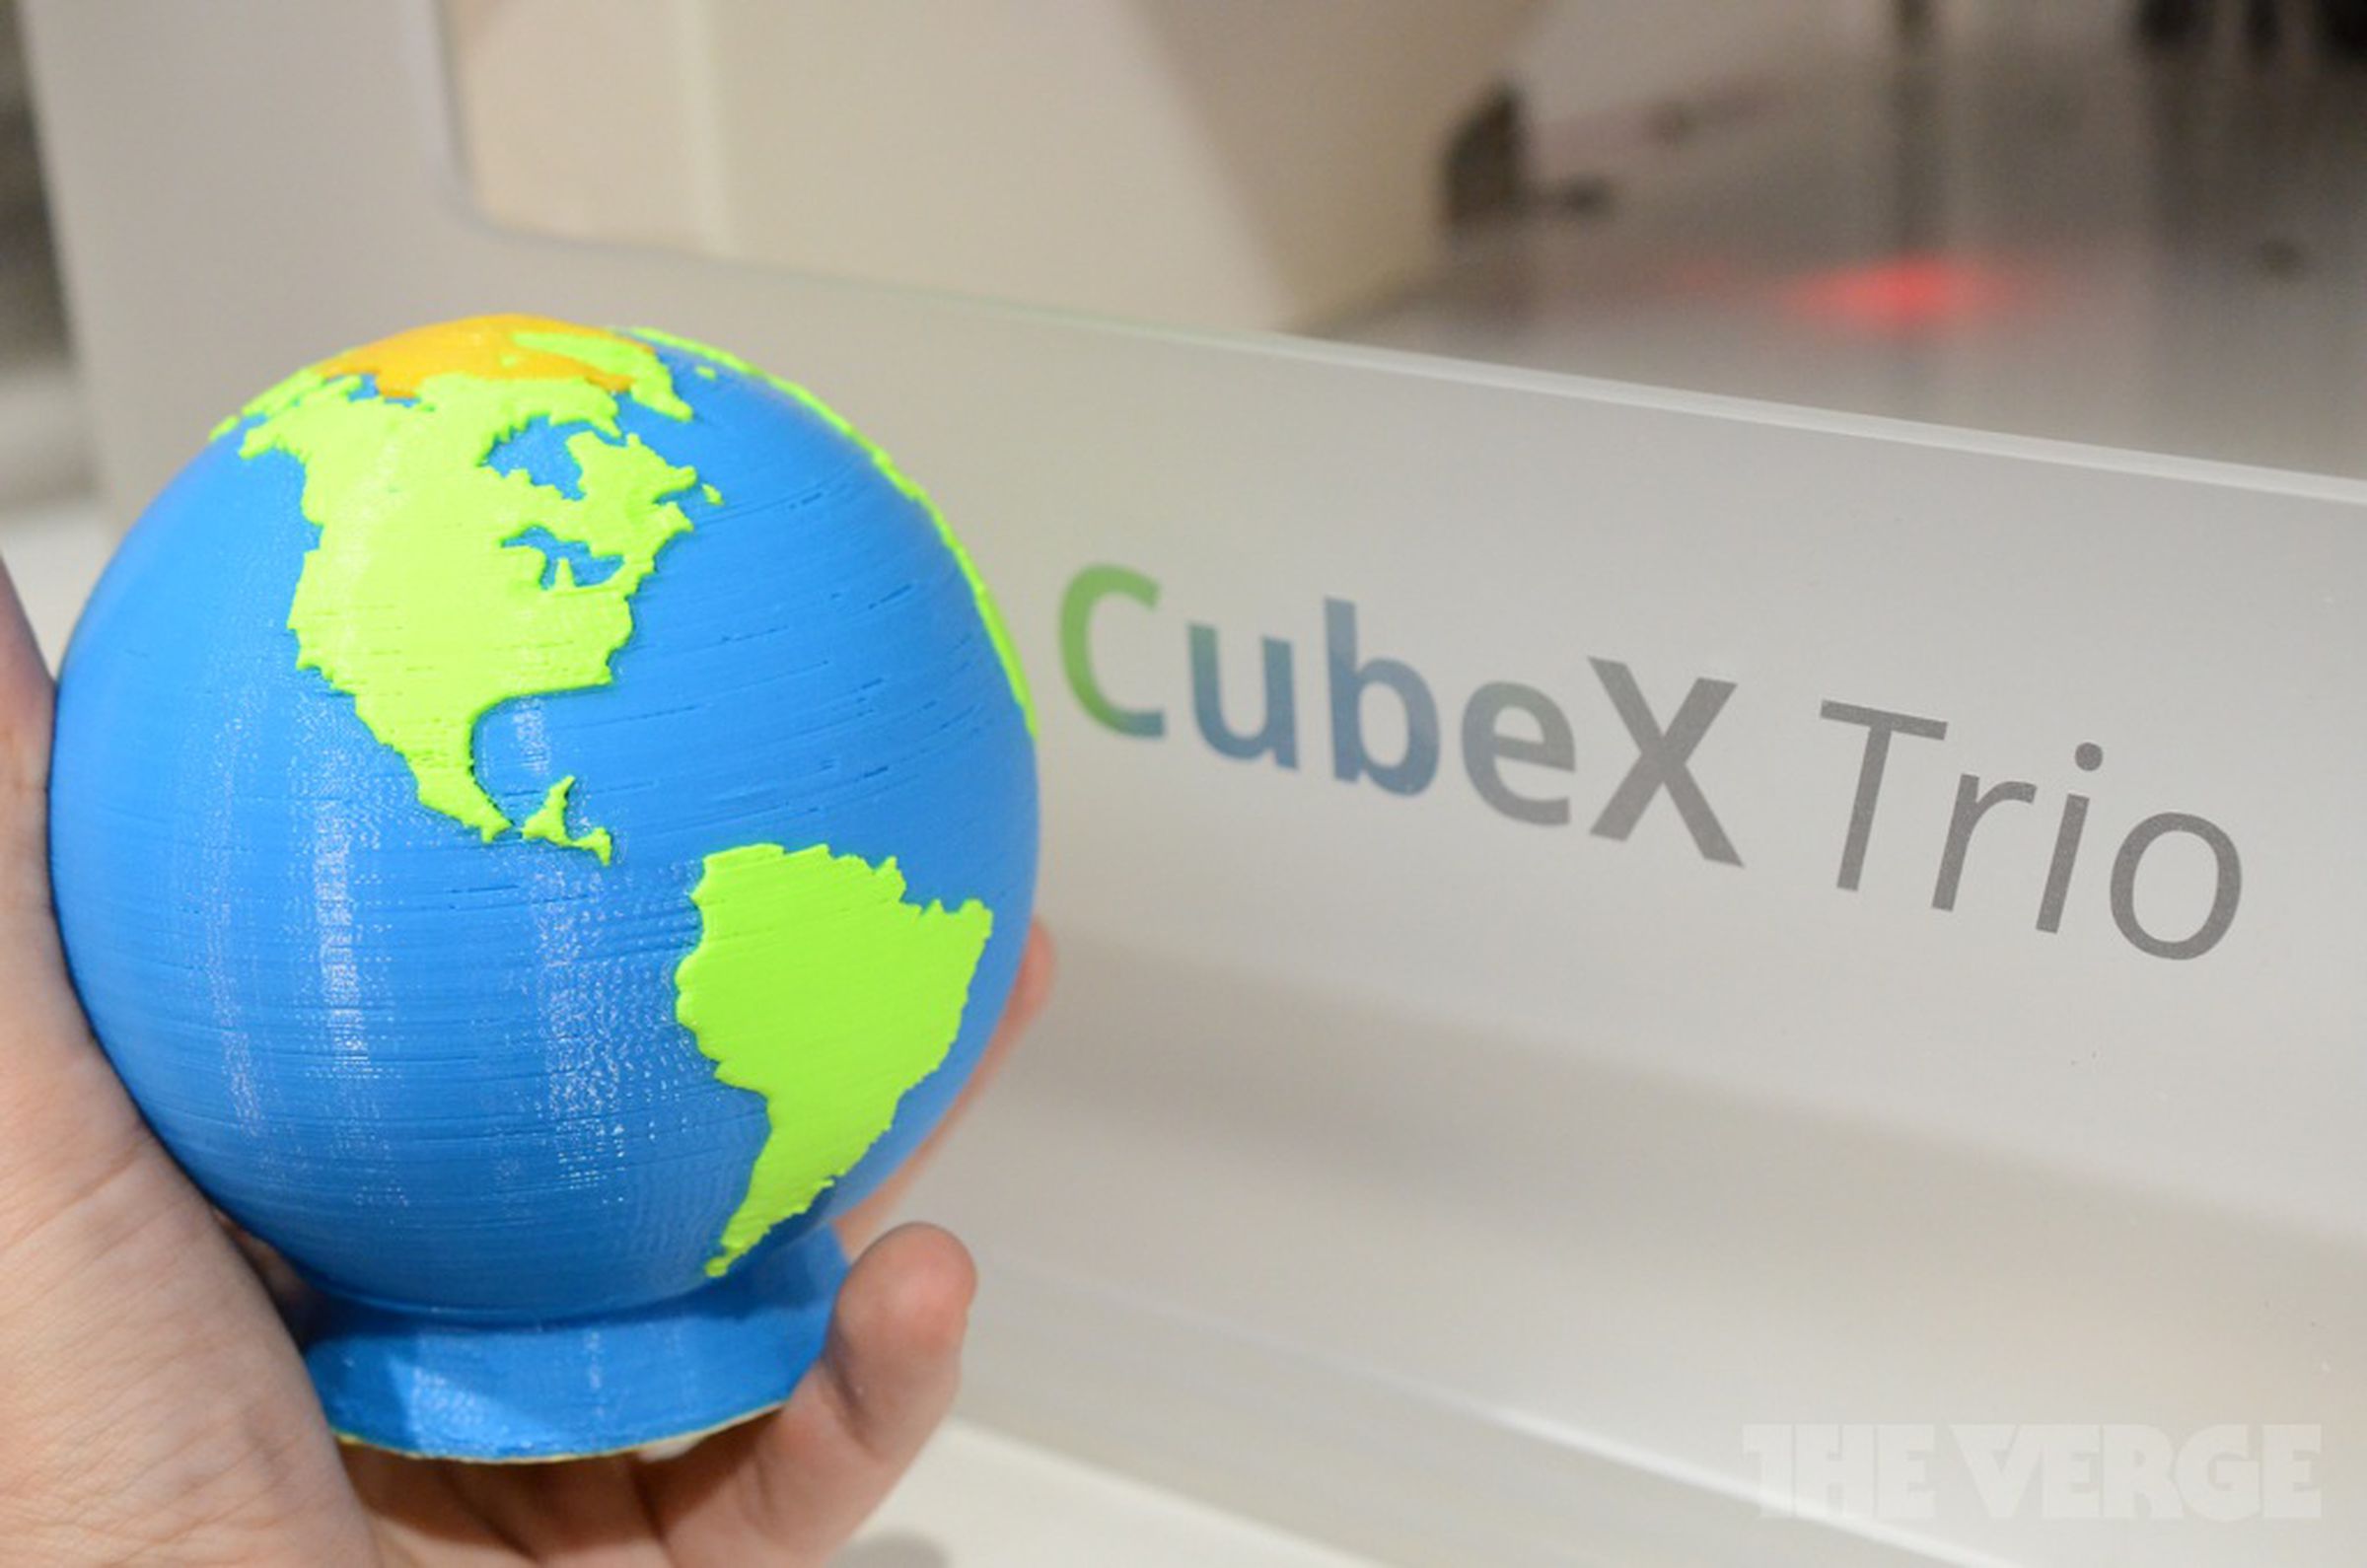 3D Systems CubeX Trio hands-on